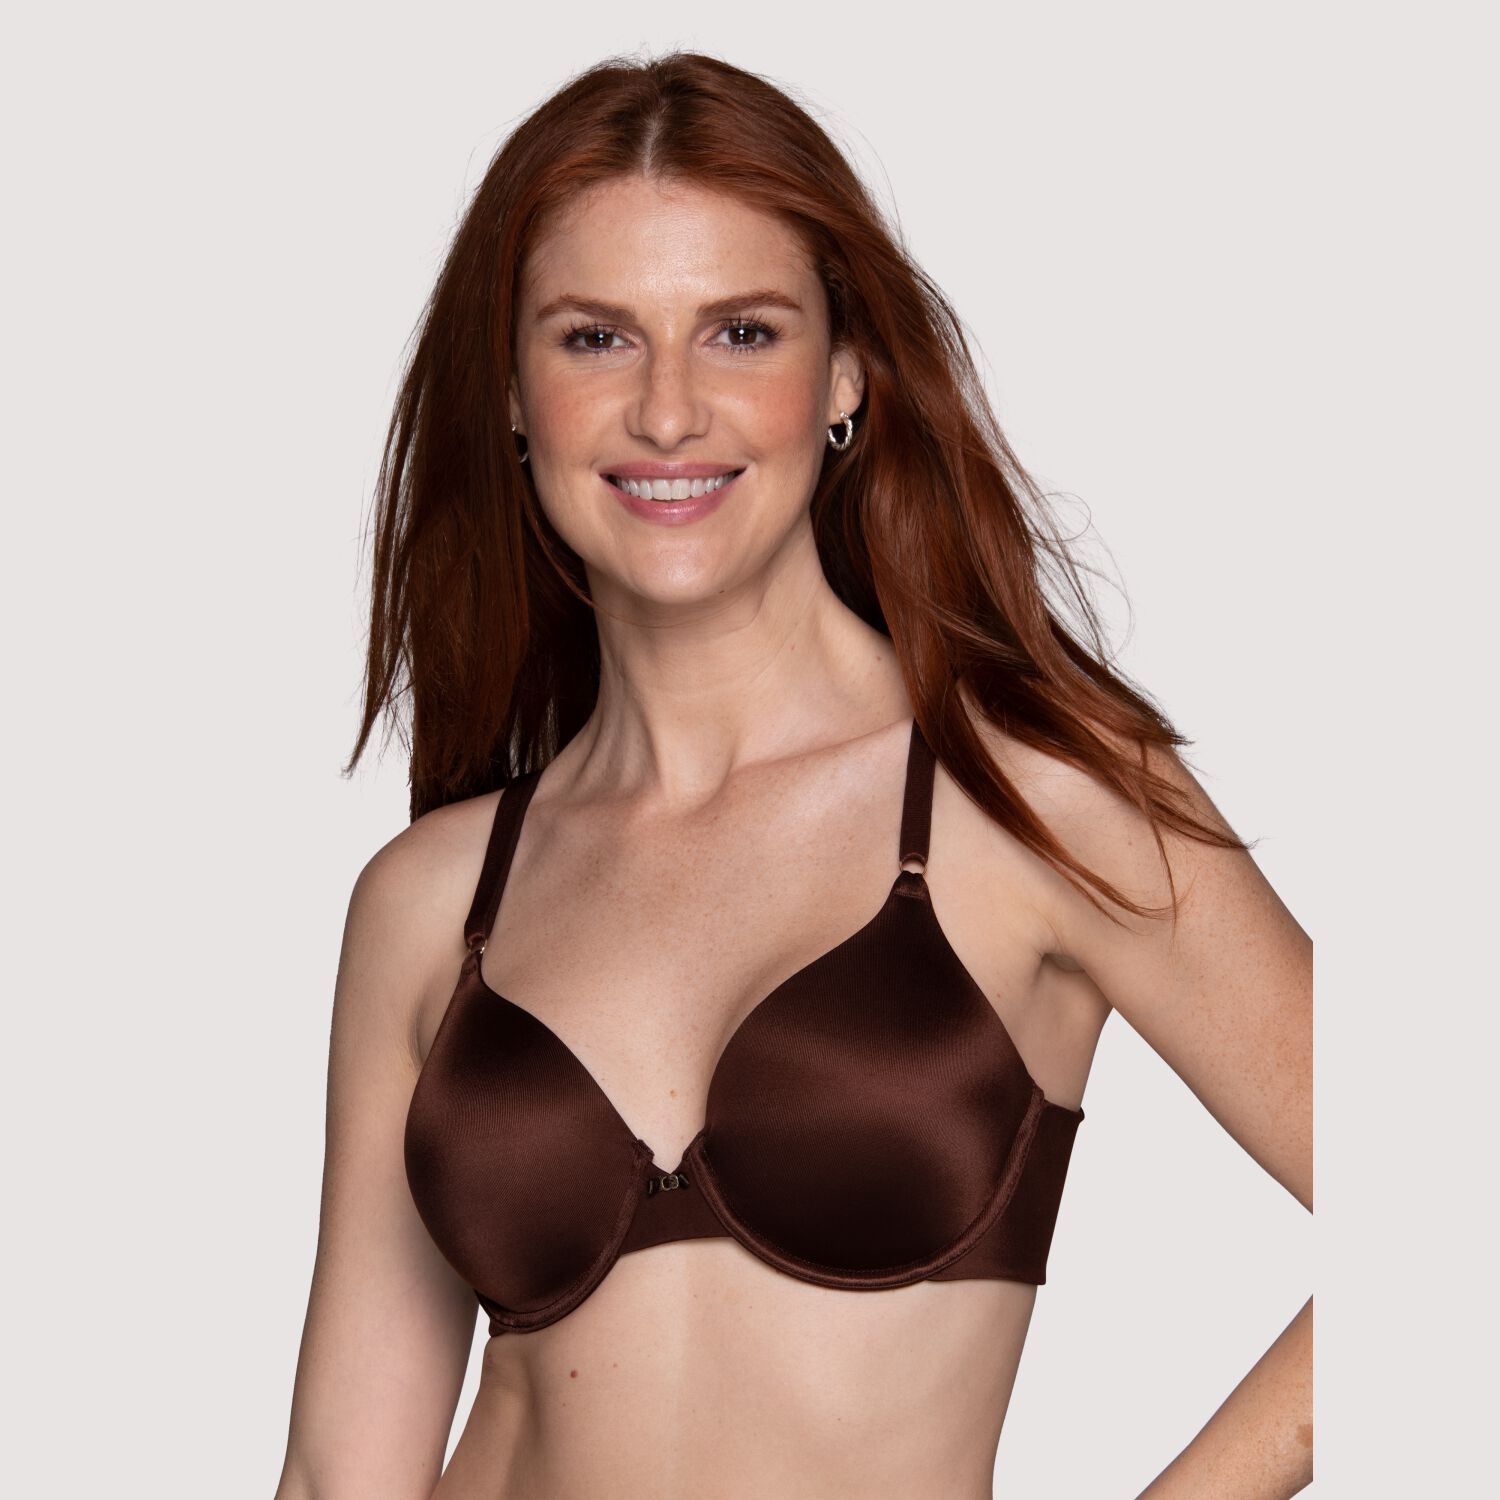 Beauty Back® Full Coverage Underwire Smoothing Bra CAPPUCCINO